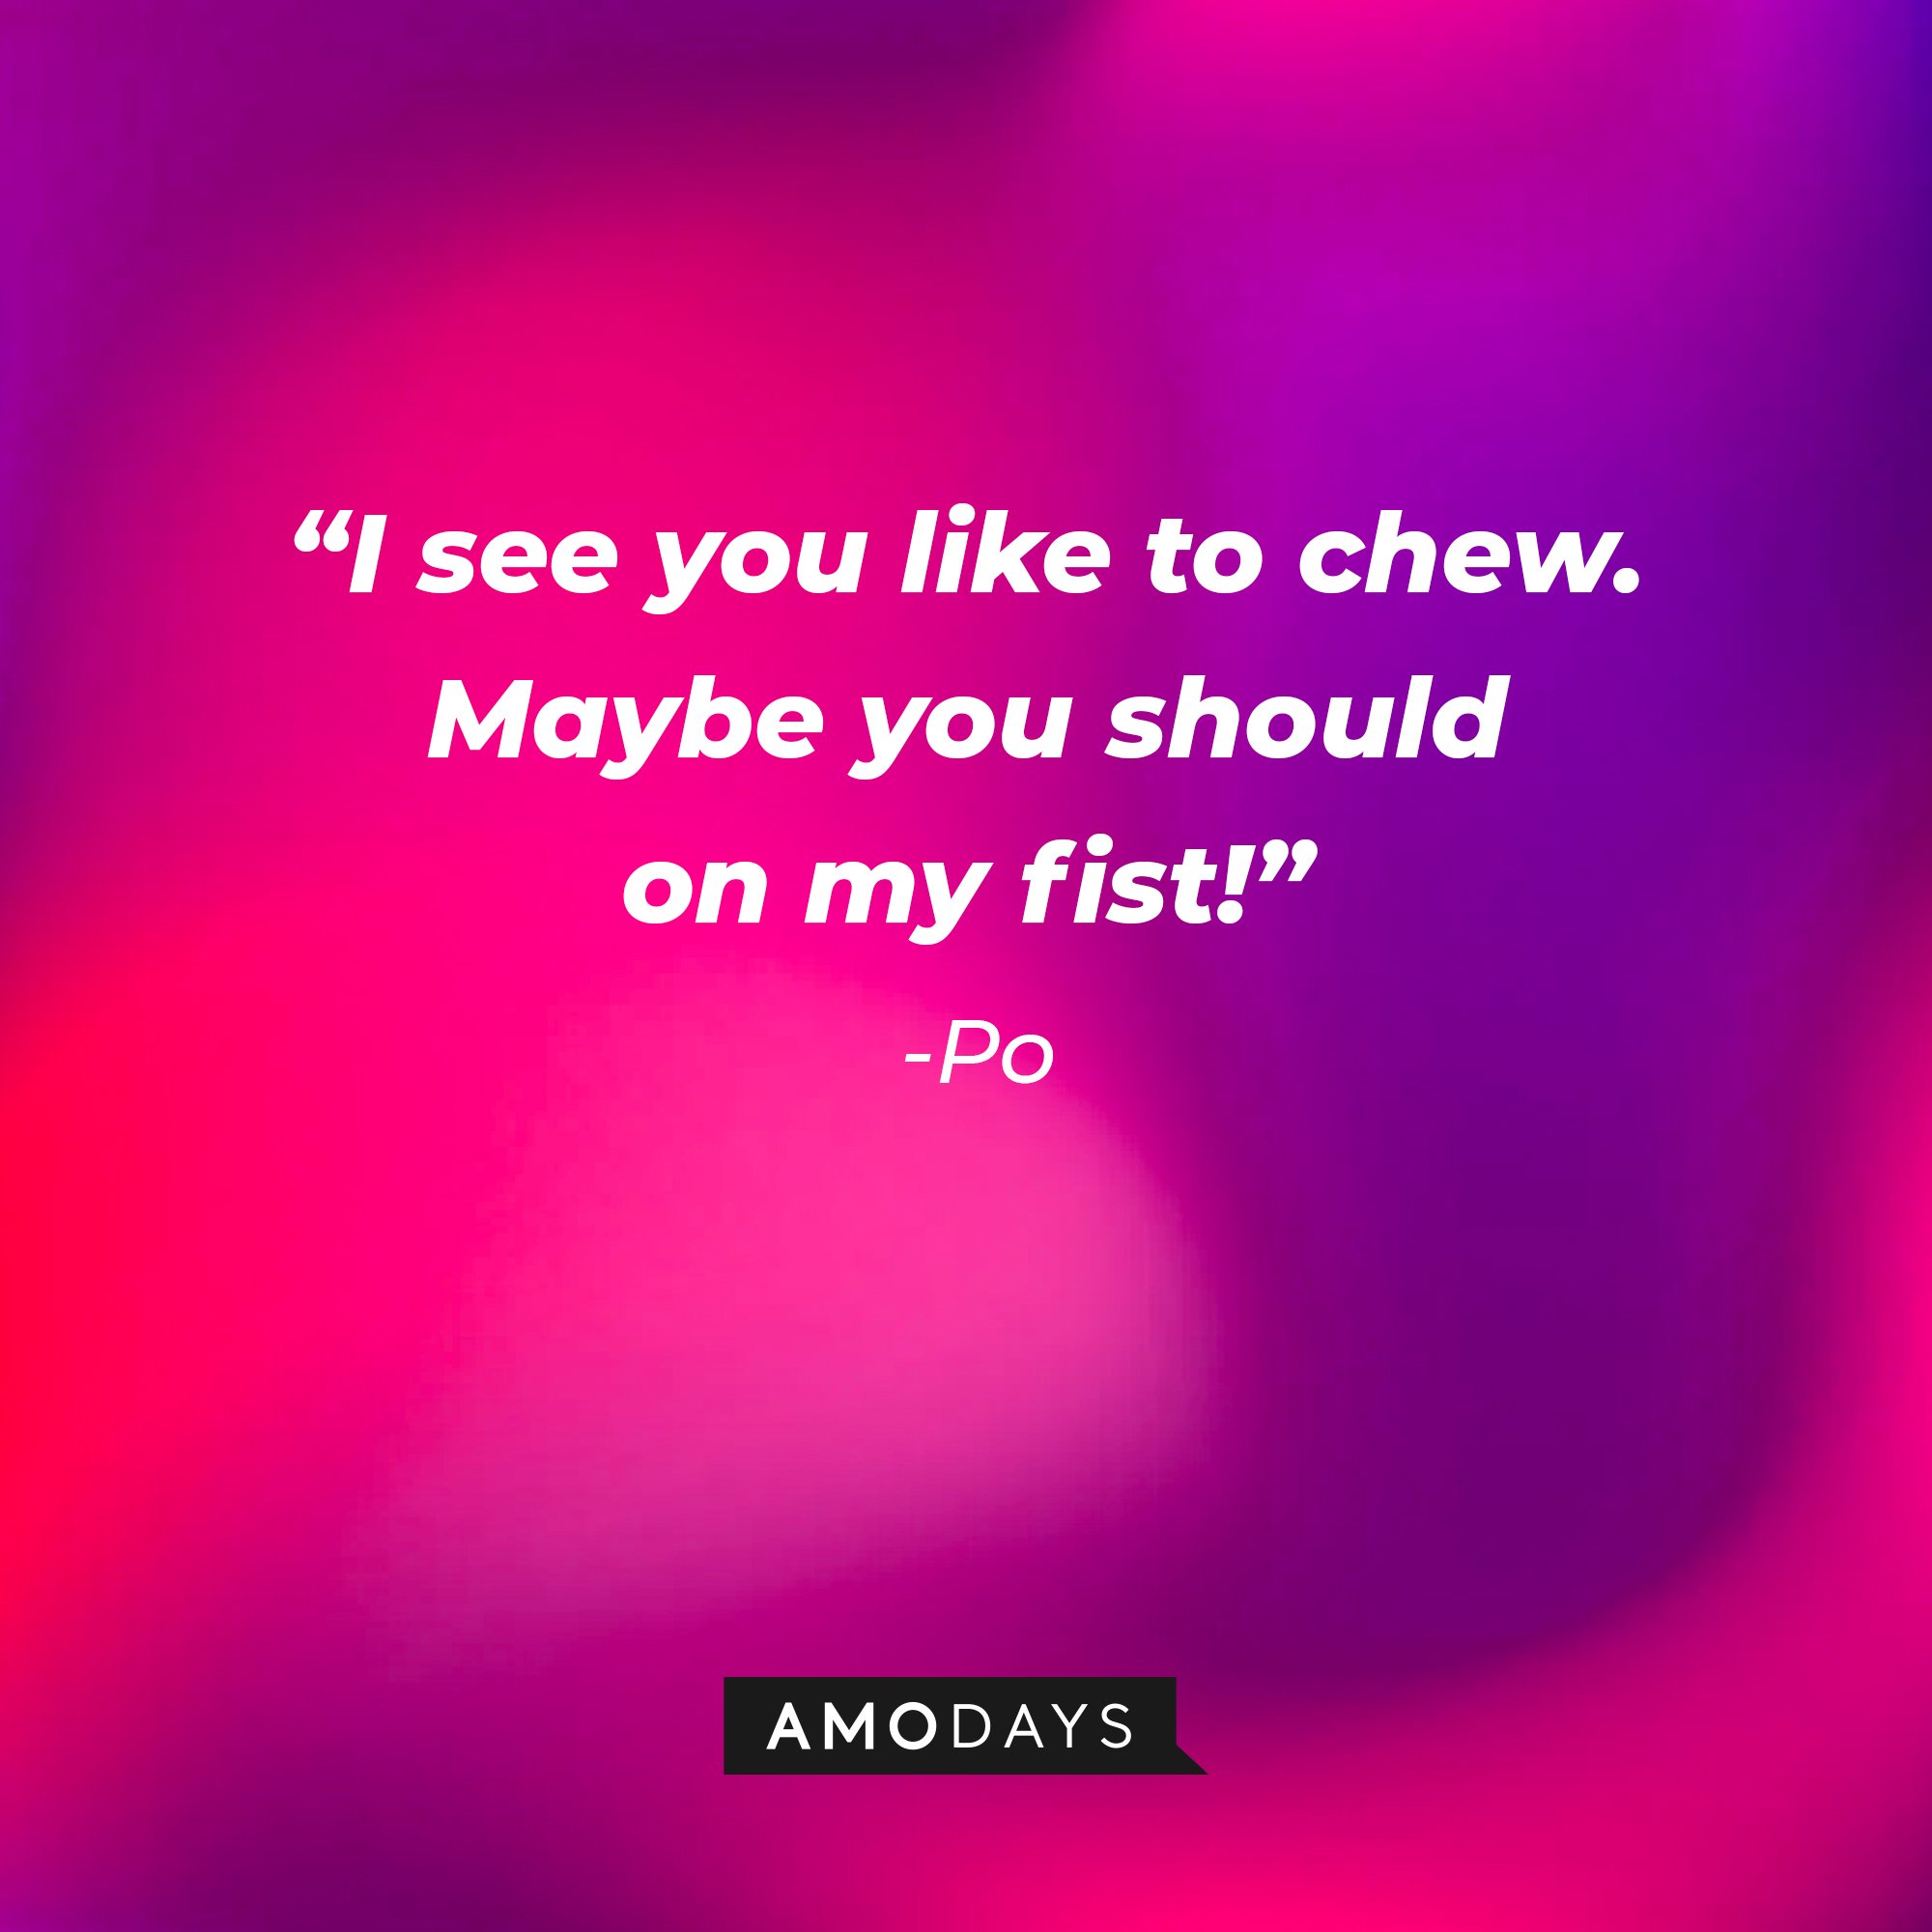 Po's quote: “I see you like to chew. Maybe you should on my fist!” | Image: AmoDays